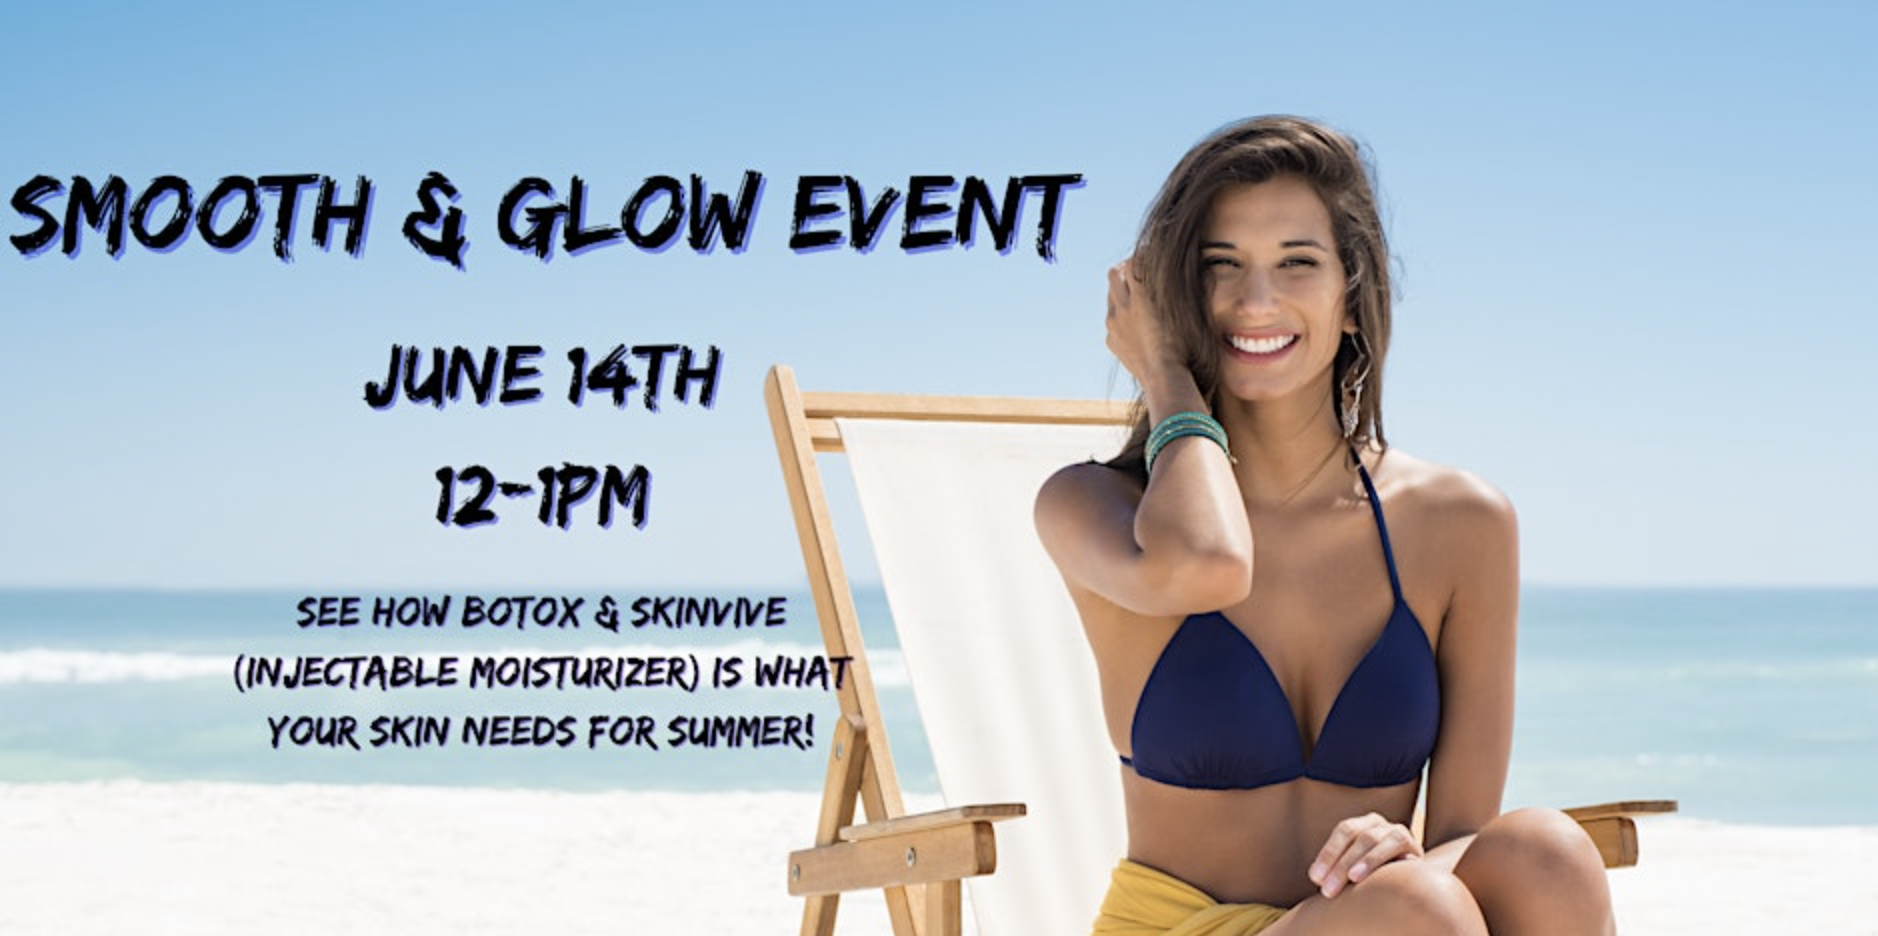 Smooth & Glow Event